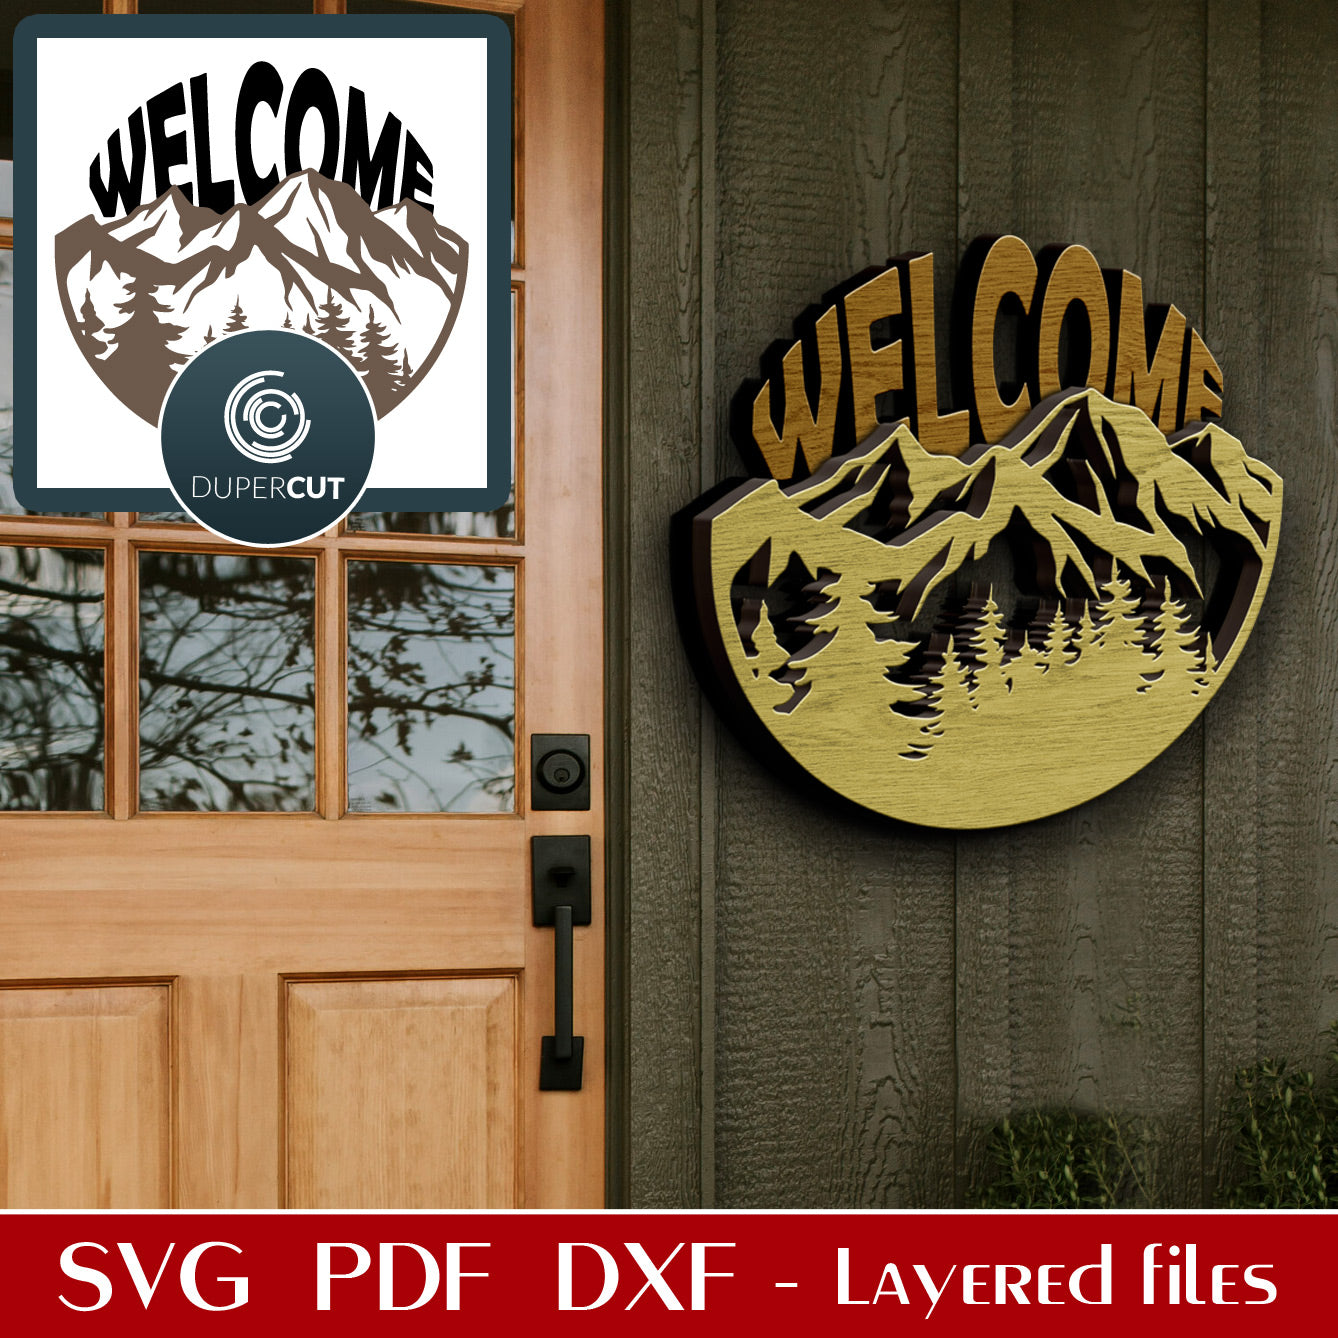 Mountain scene welcome sign for cottage decoration - SVG PDF DXF vector layered files for Glowforge, Cricut, laser cutting and engraving by DuperCut